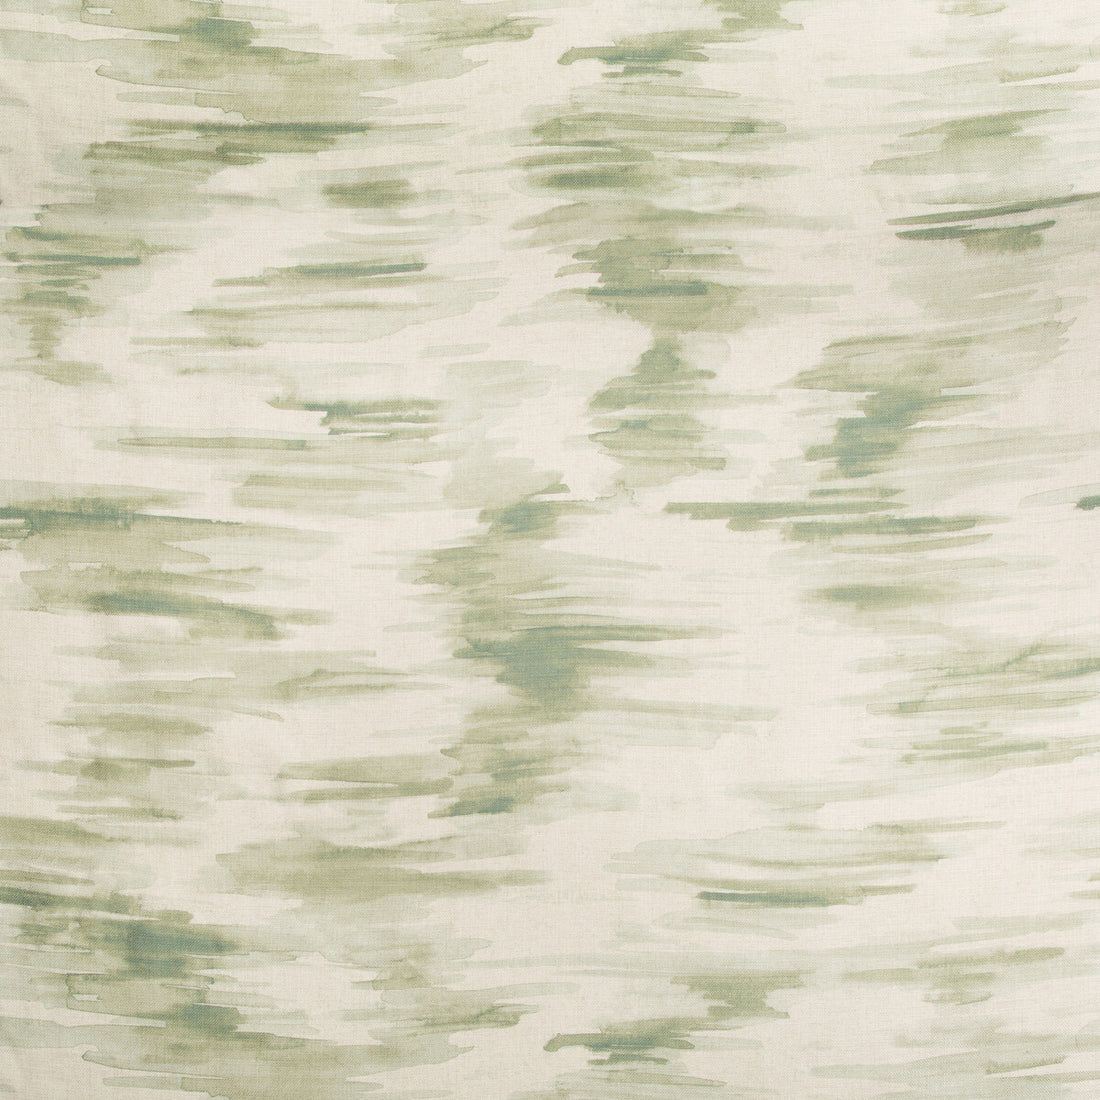 Awash fabric in leek color - pattern AWASH.130.0 - by Kravet Couture in the Barbara Barry Panorama collection